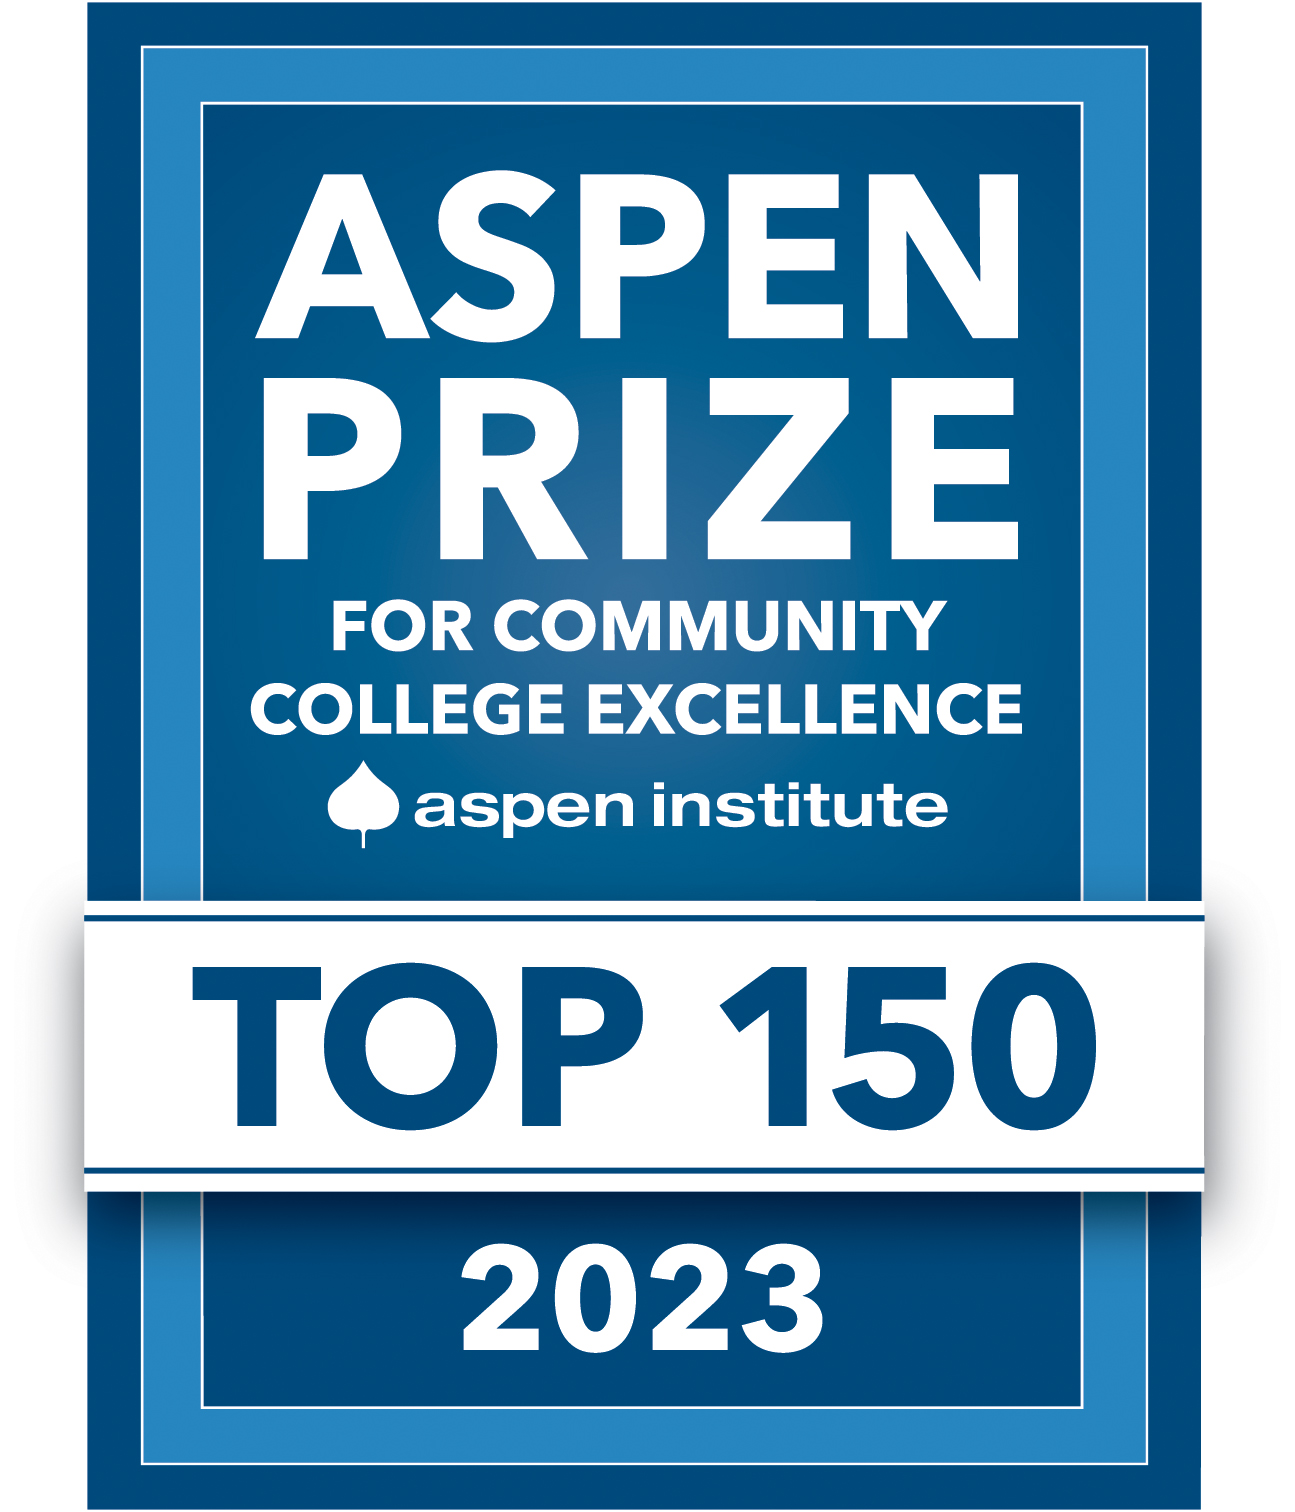 The Aspen Prize for Community College Excellence badge.